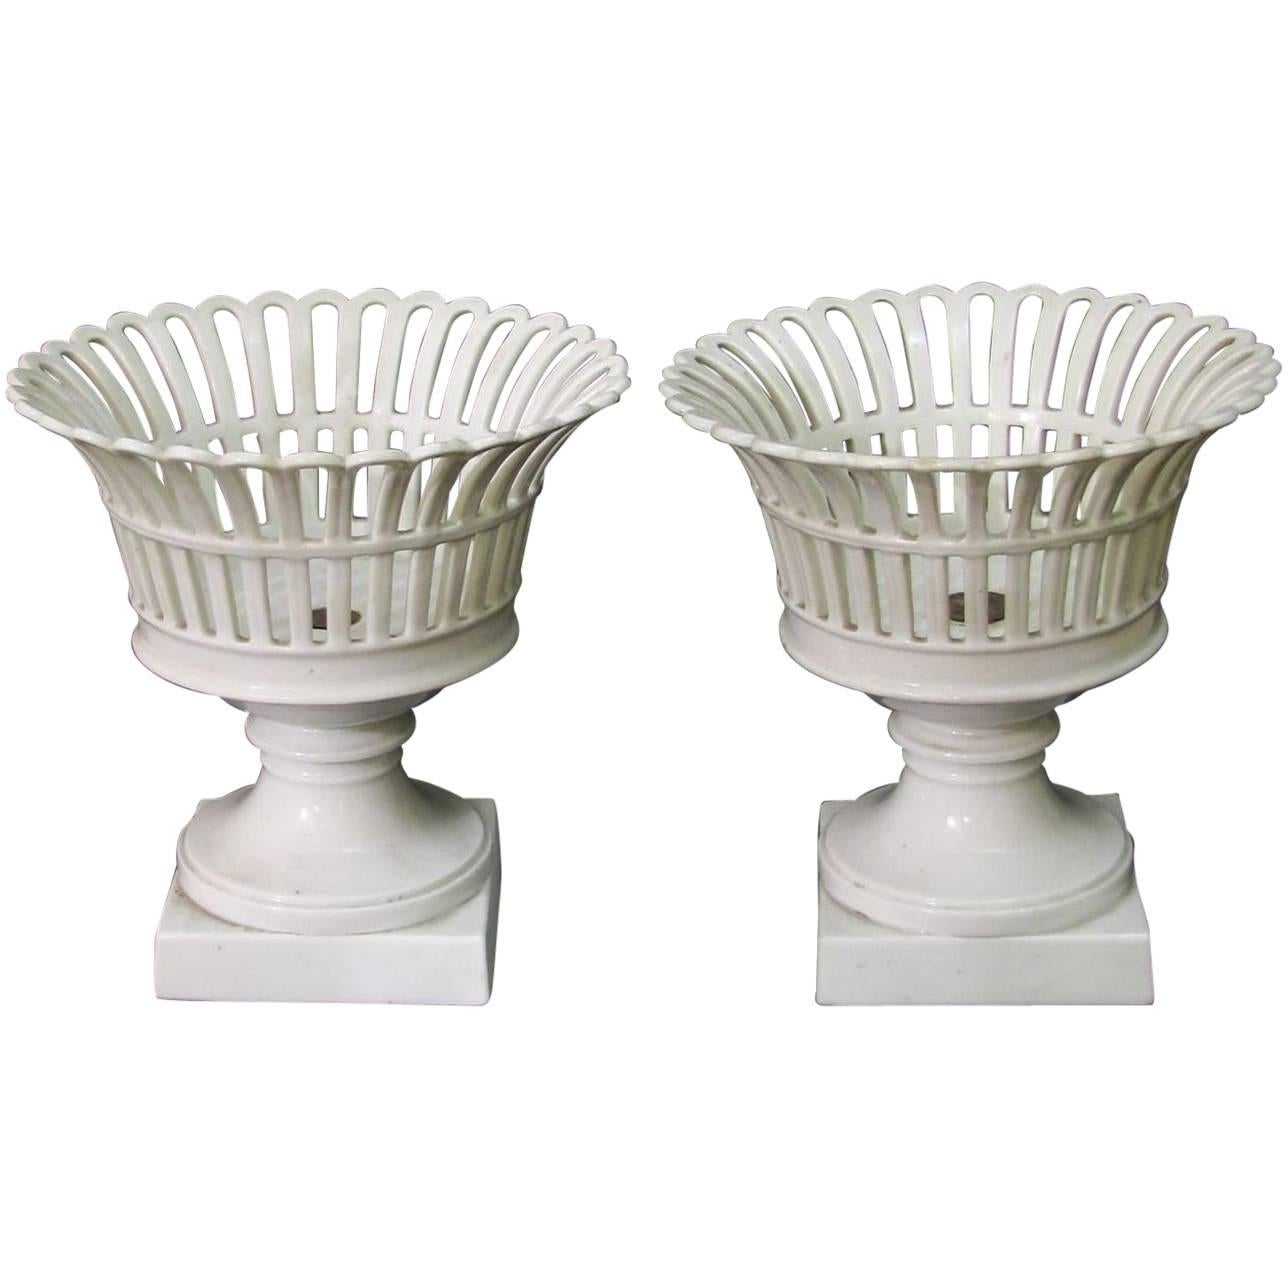 Pair of 19th Century Italian White Porcelain Fruit Baskets or Bowls For Sale